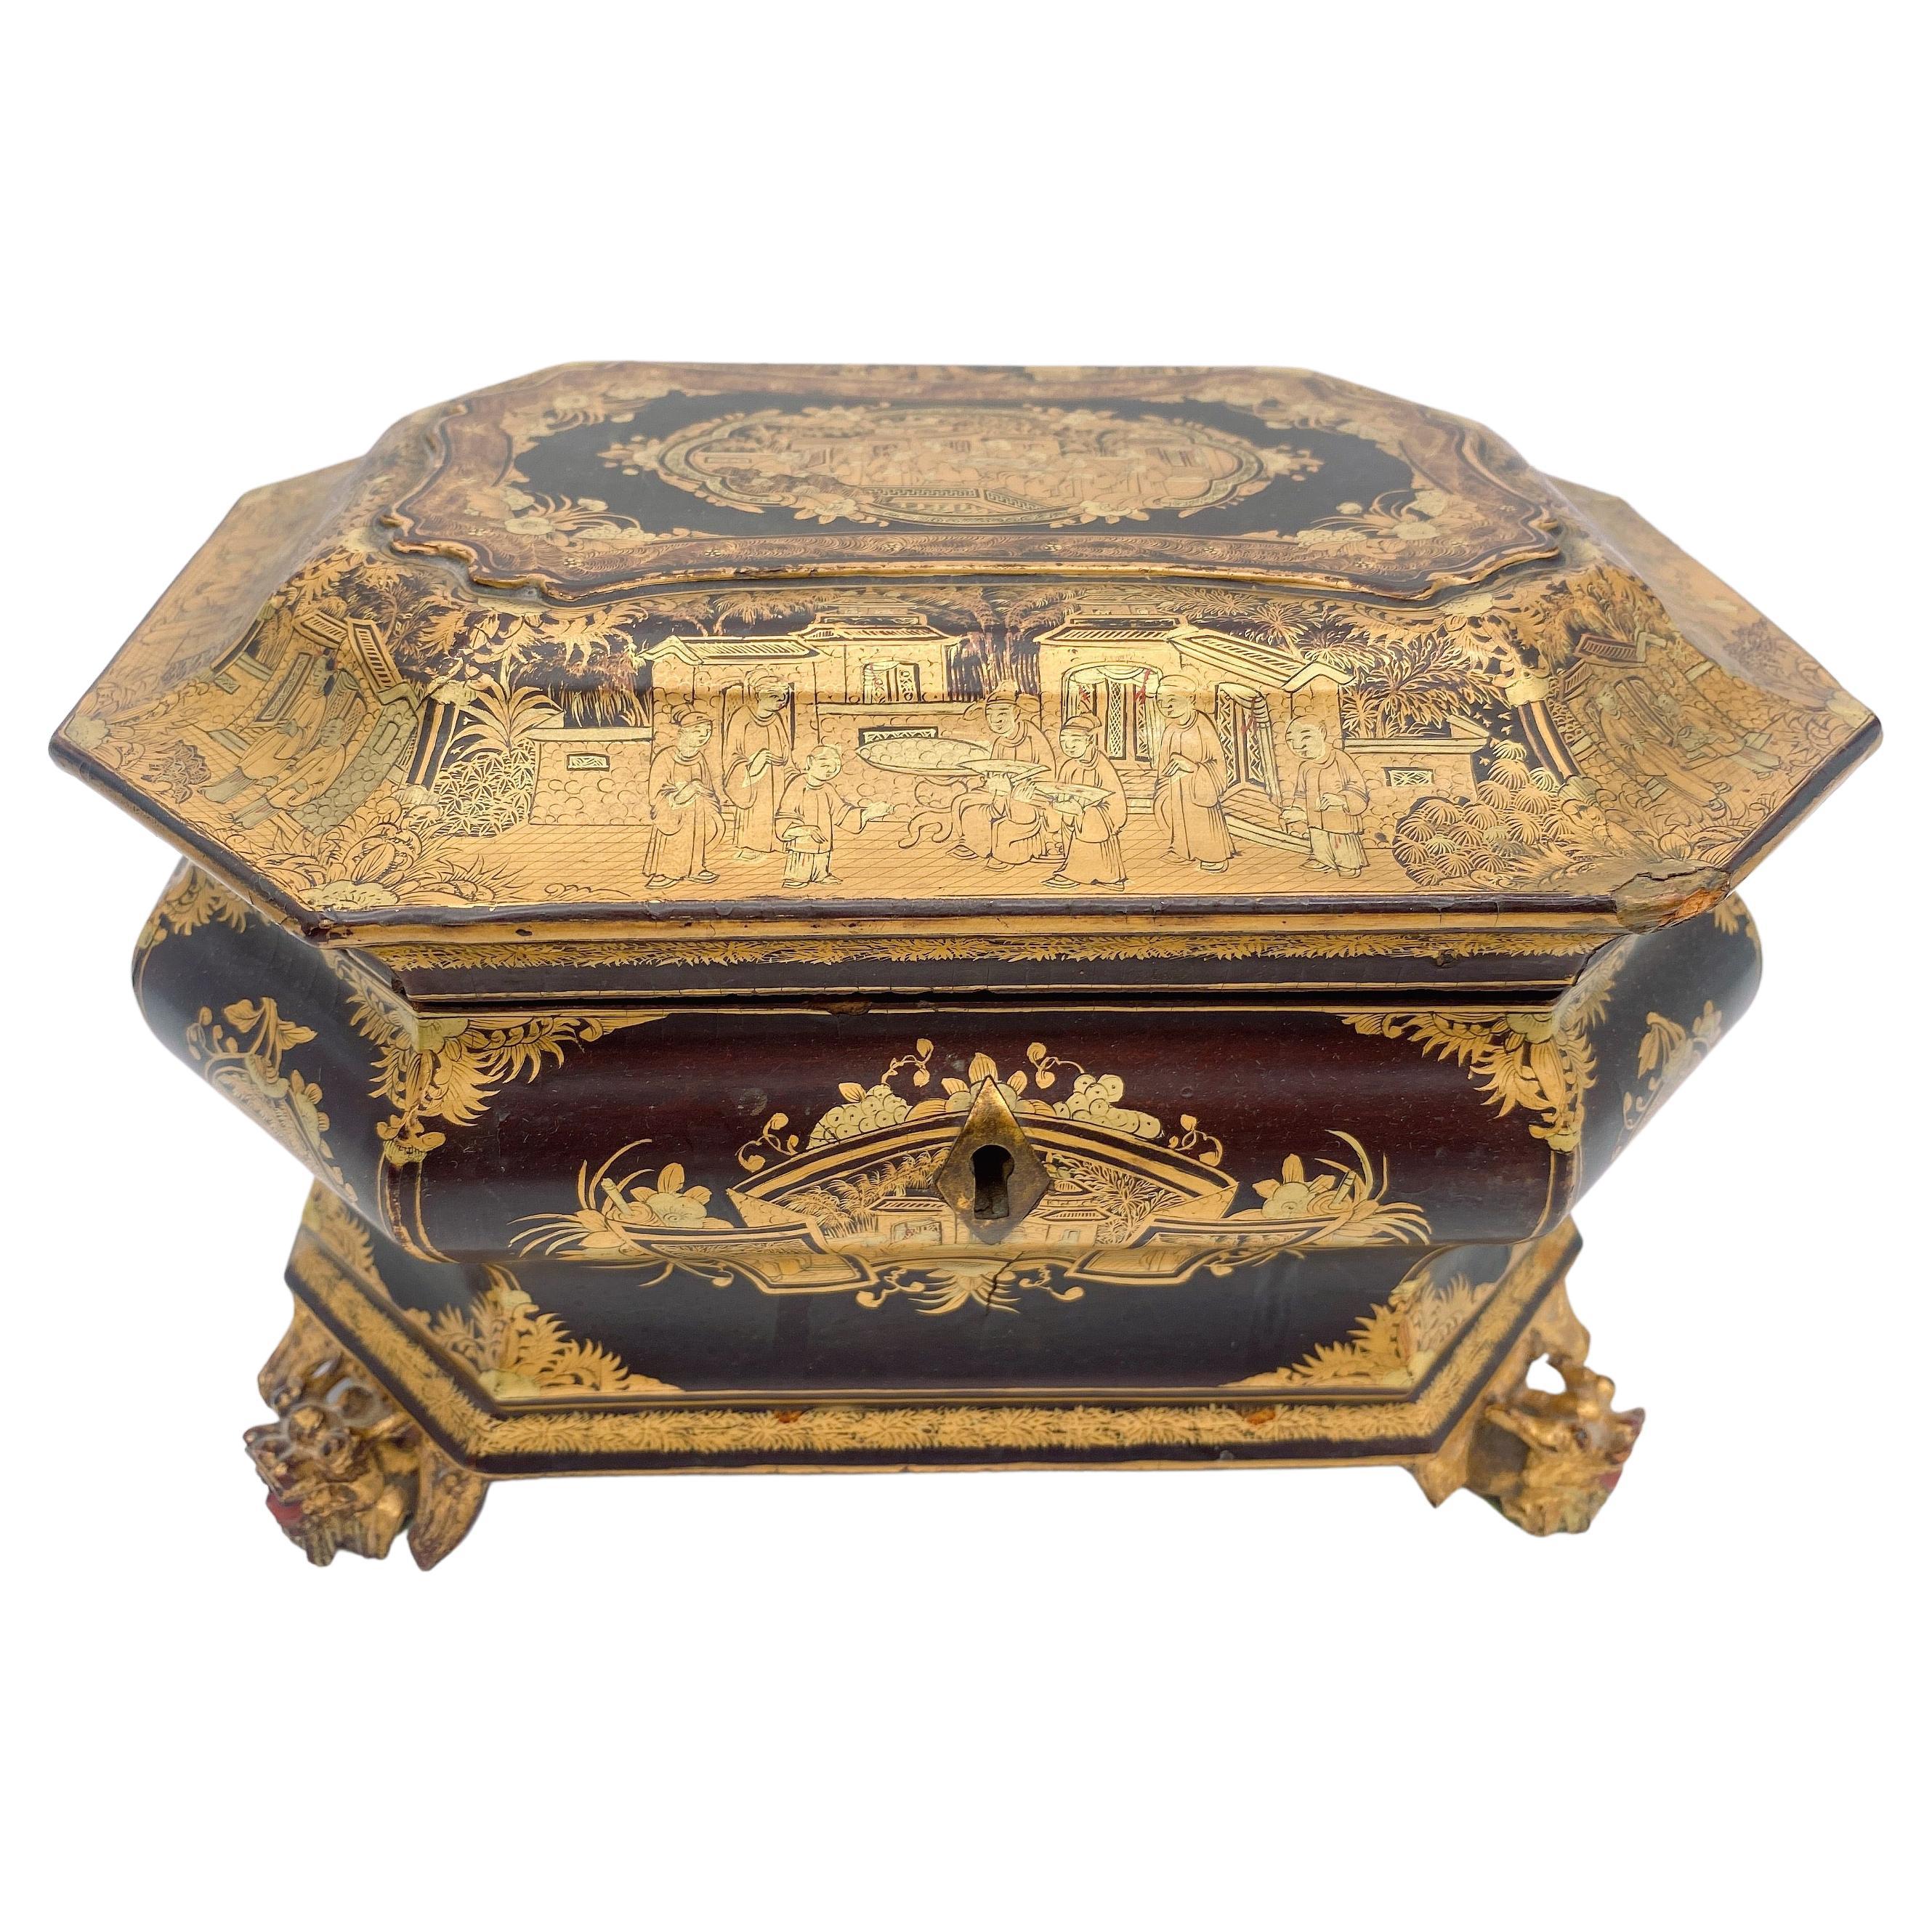 19th Century Antique Gilt Lacquer Chinese Tea Caddy